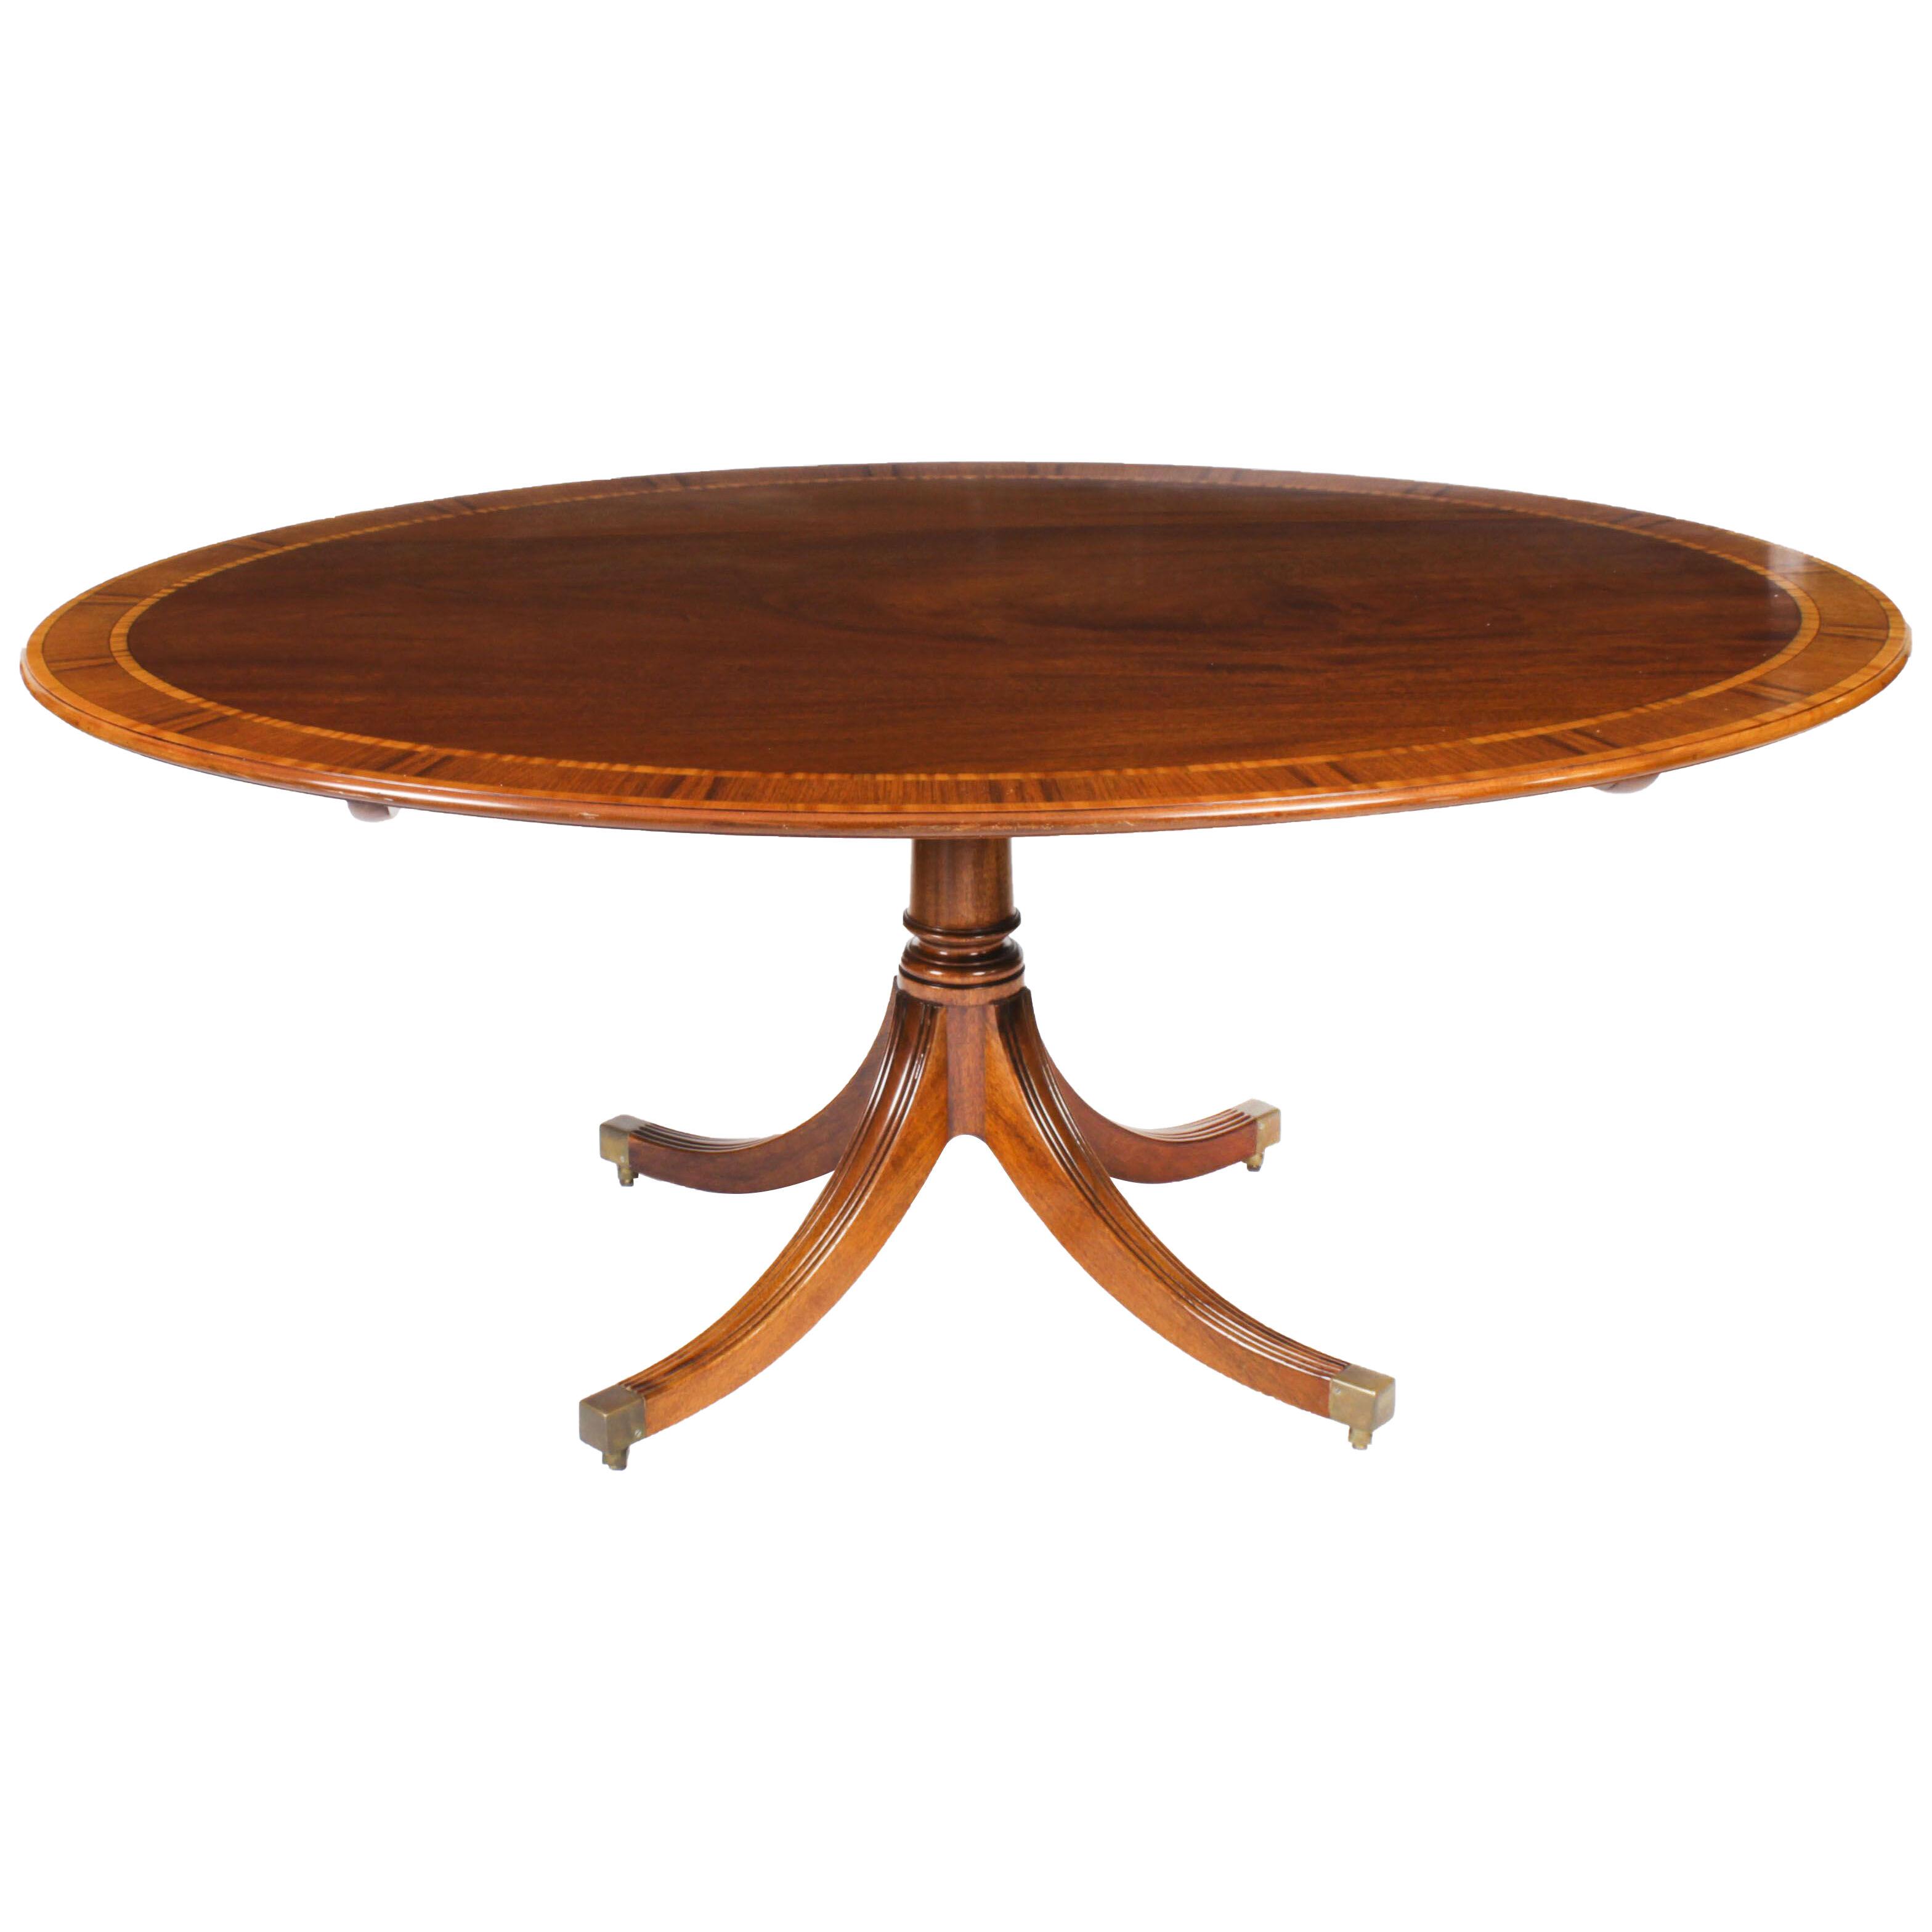 Vintage 5 ft 6" Oval Mahogany Dining Table by William Tillman 20th Century